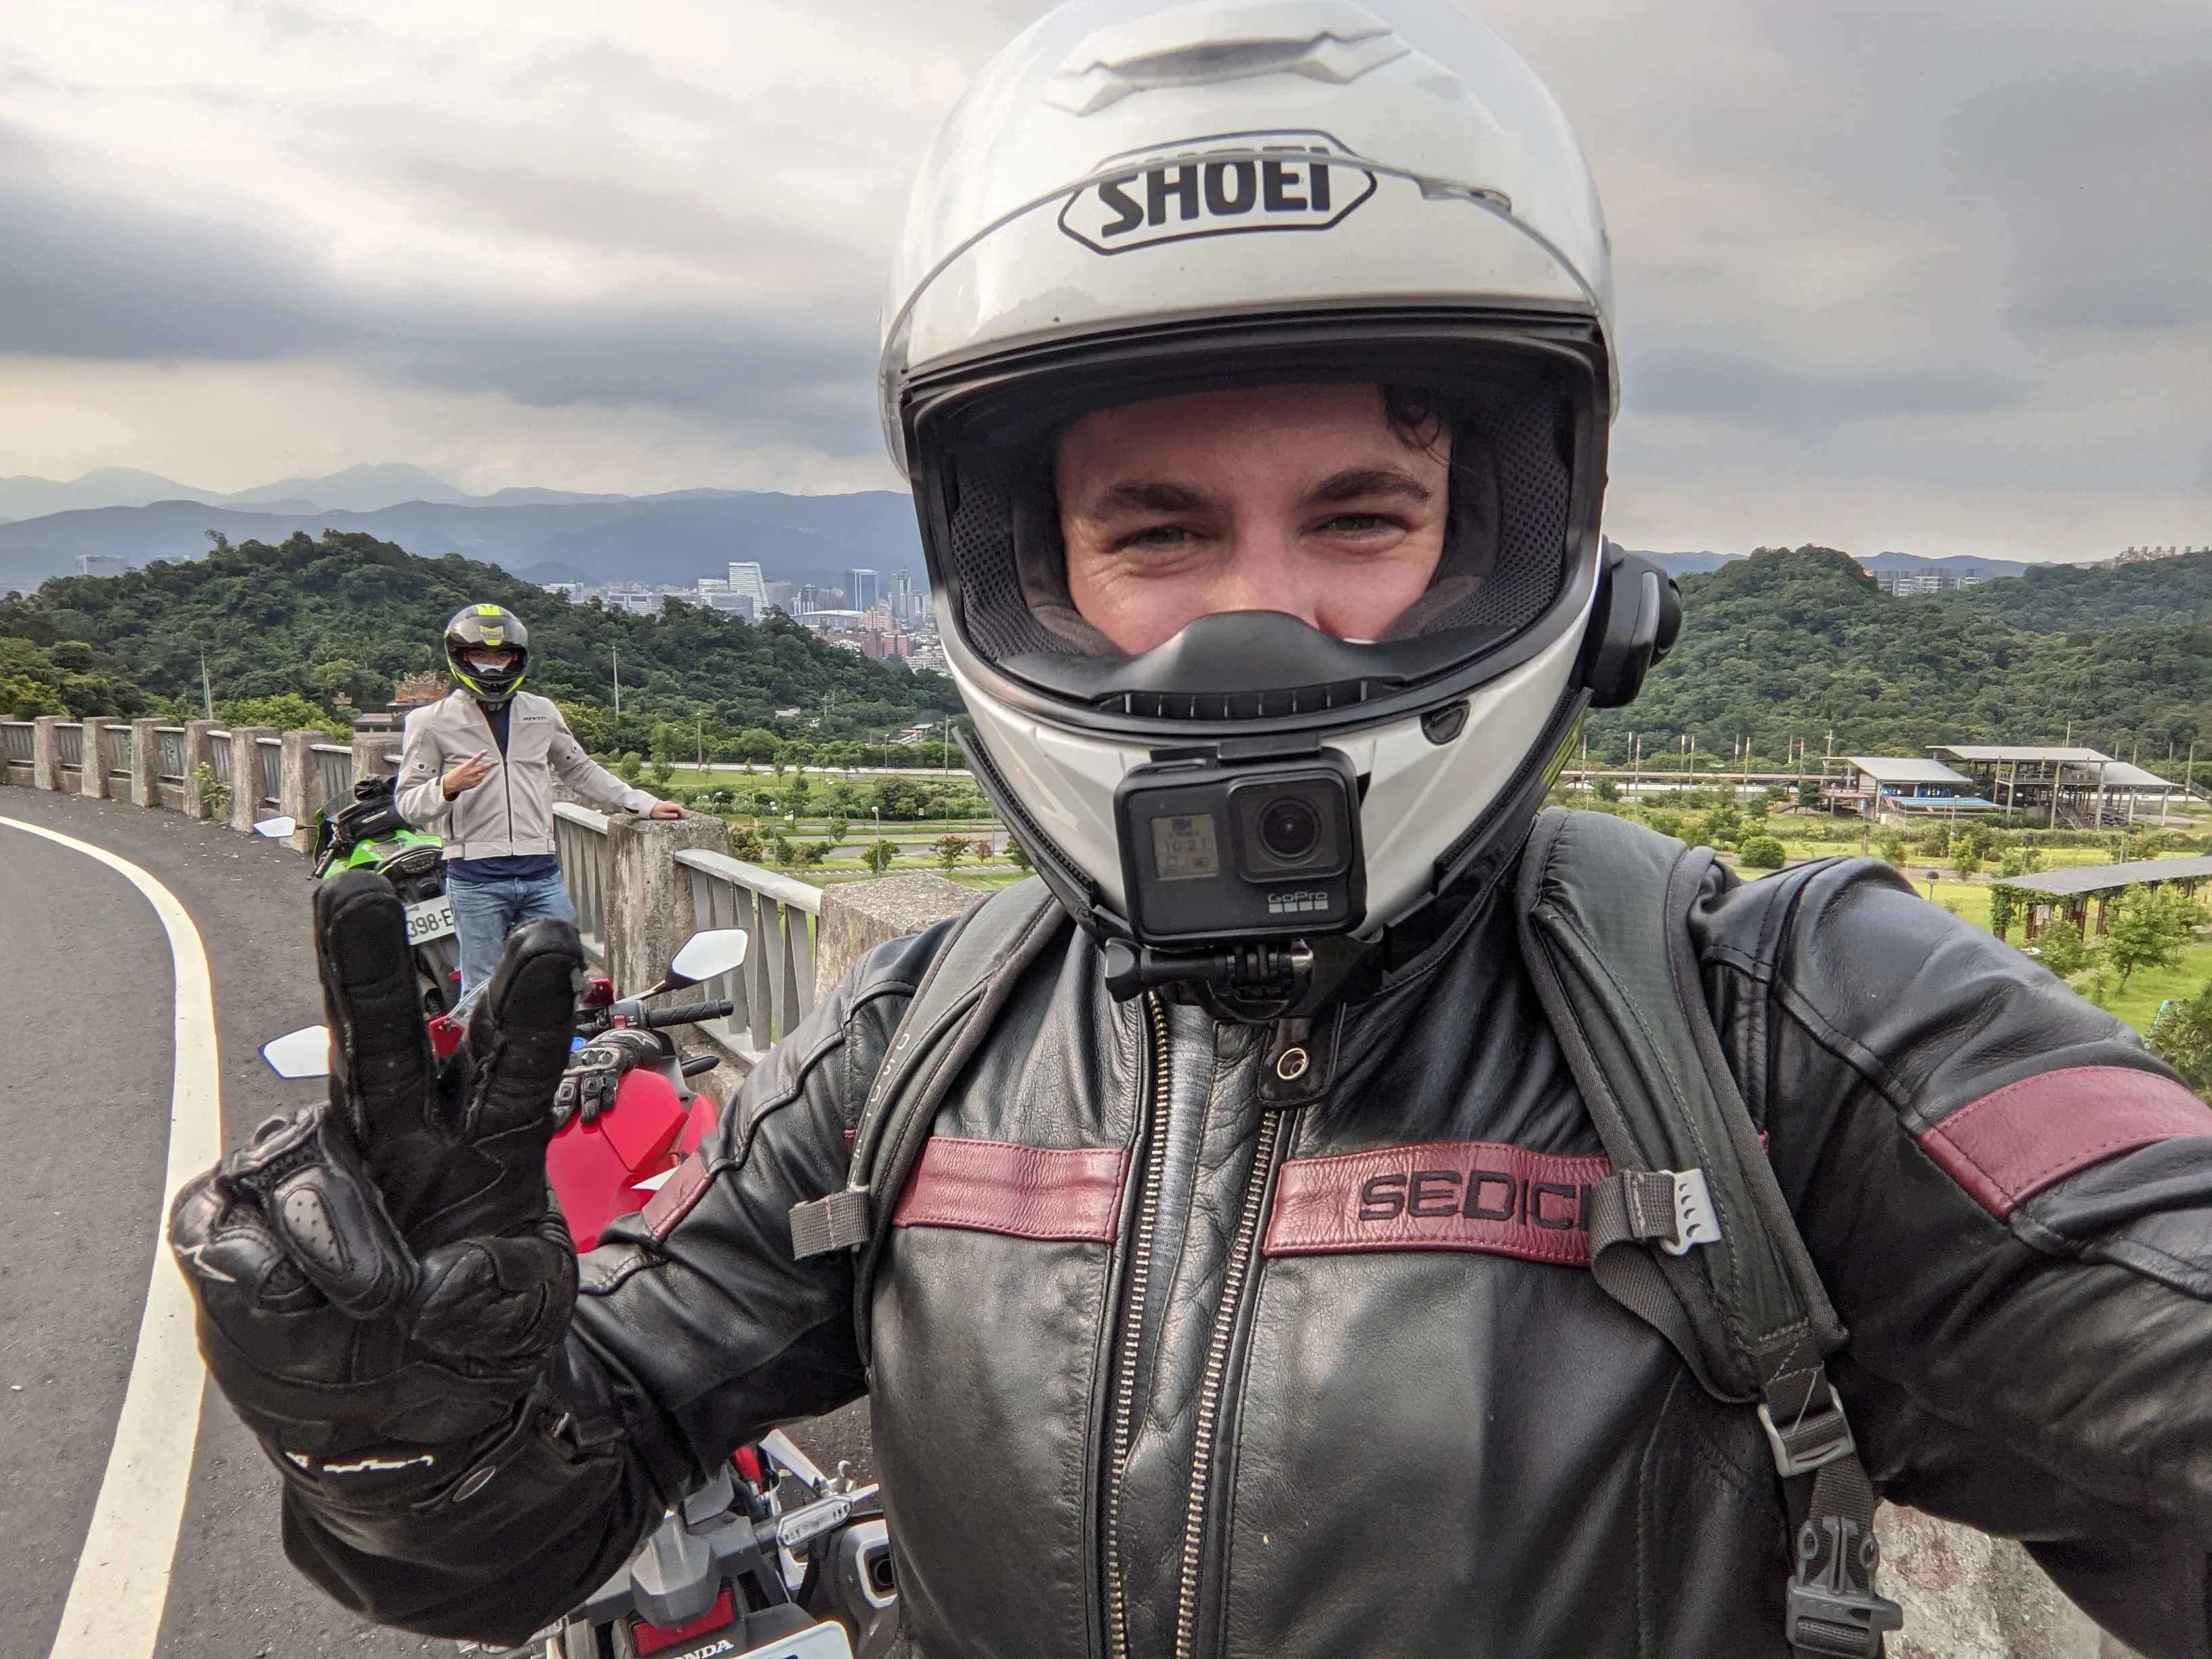 Caleb posing with his motorcycle in the mountains near Taipei.